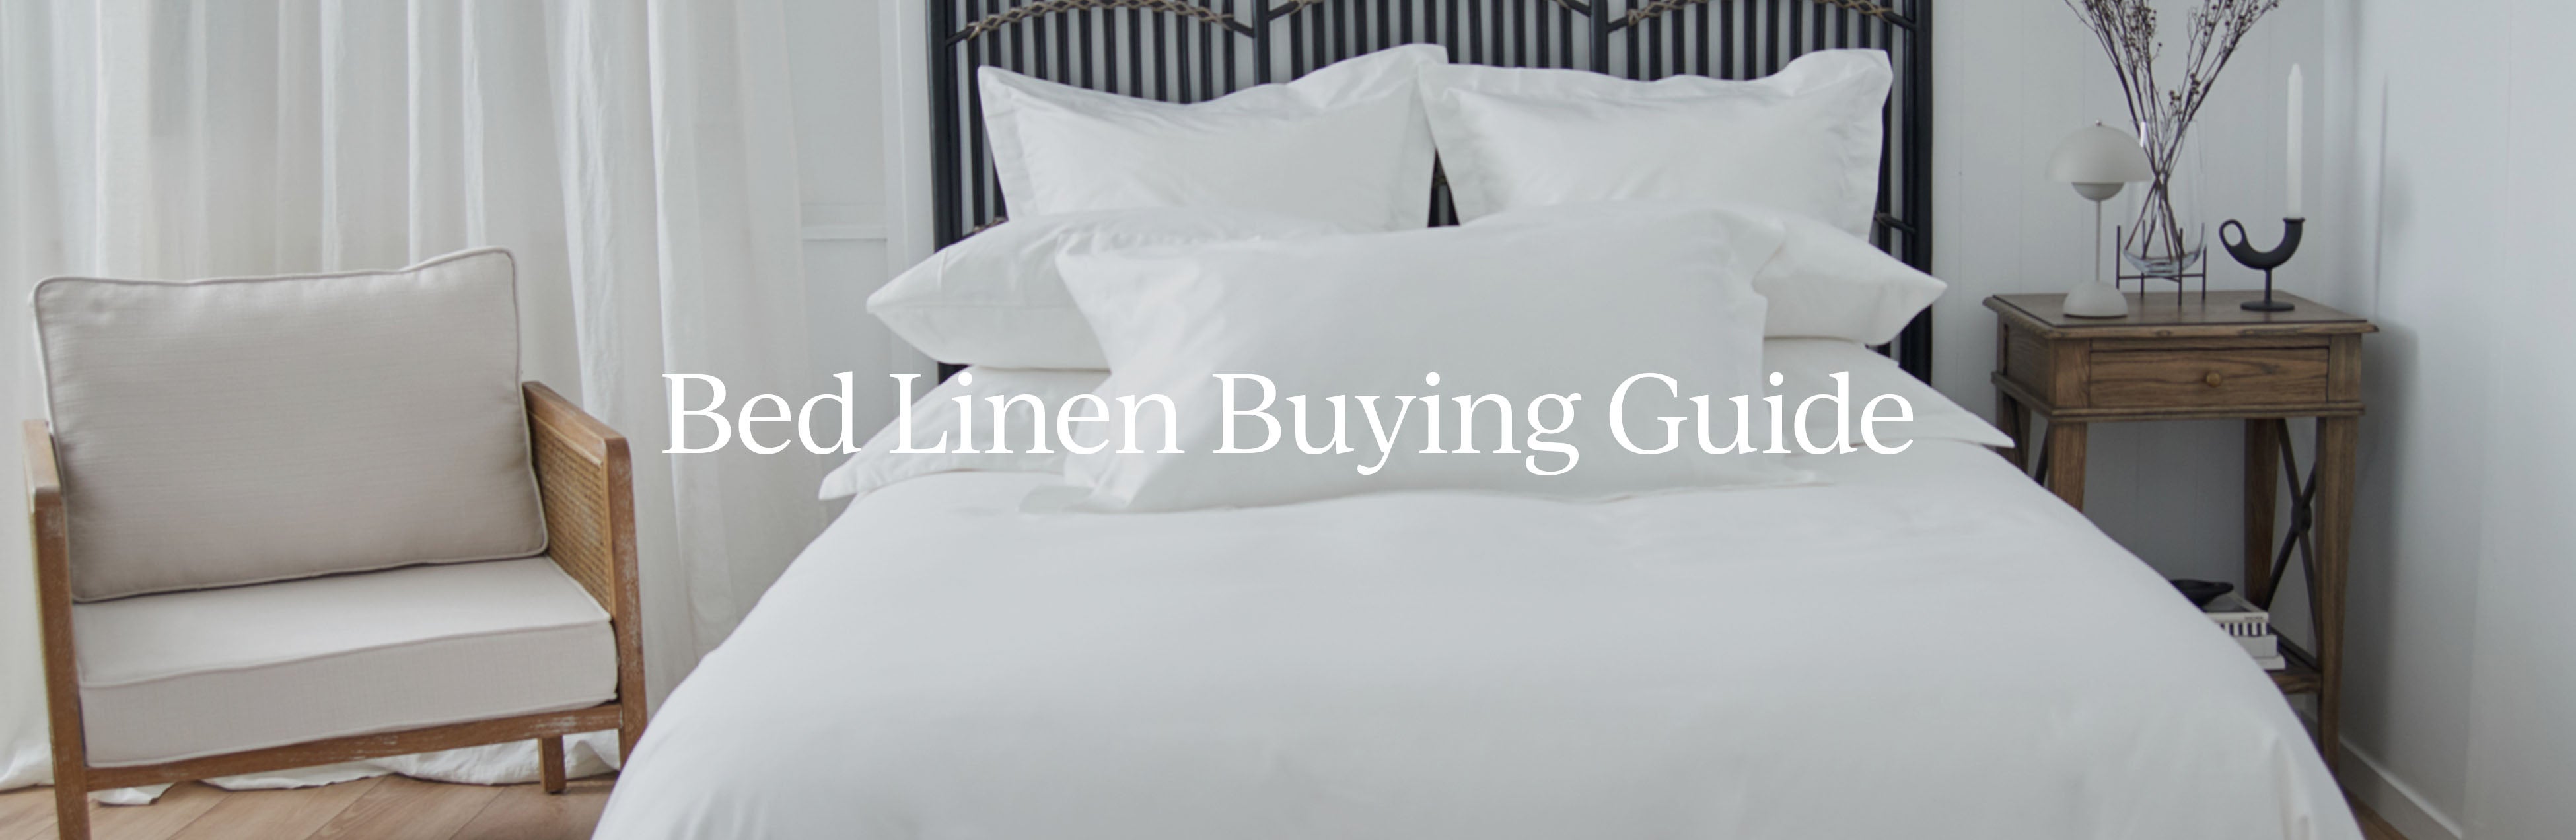 Bed Linen designed for your home